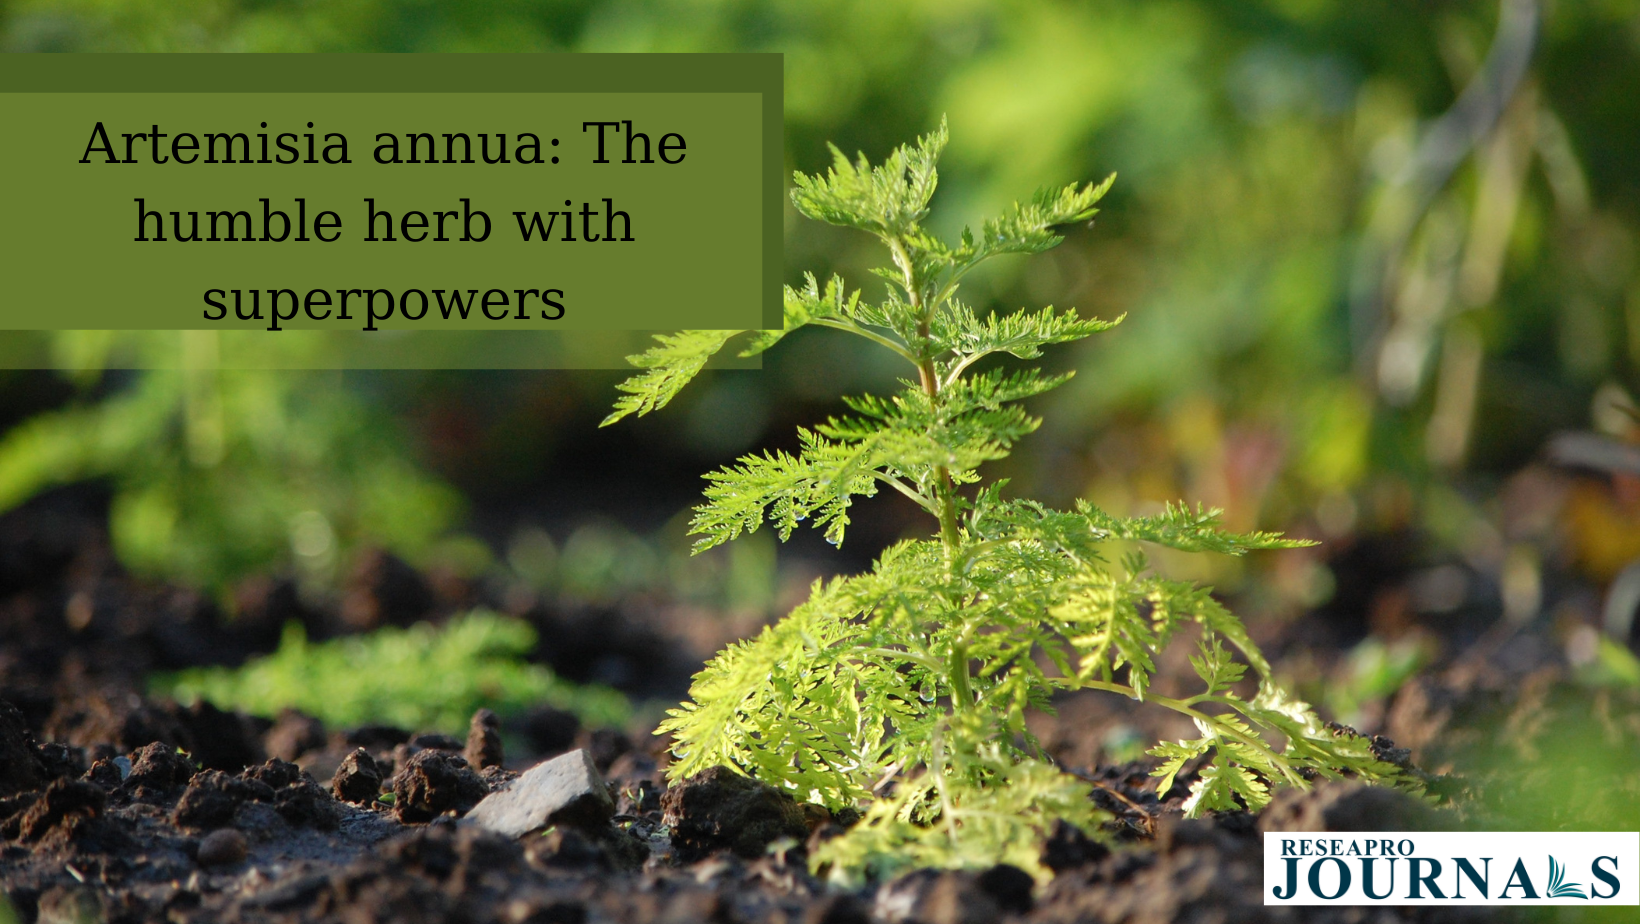 Artemisia annua: The humble herb with superpowers